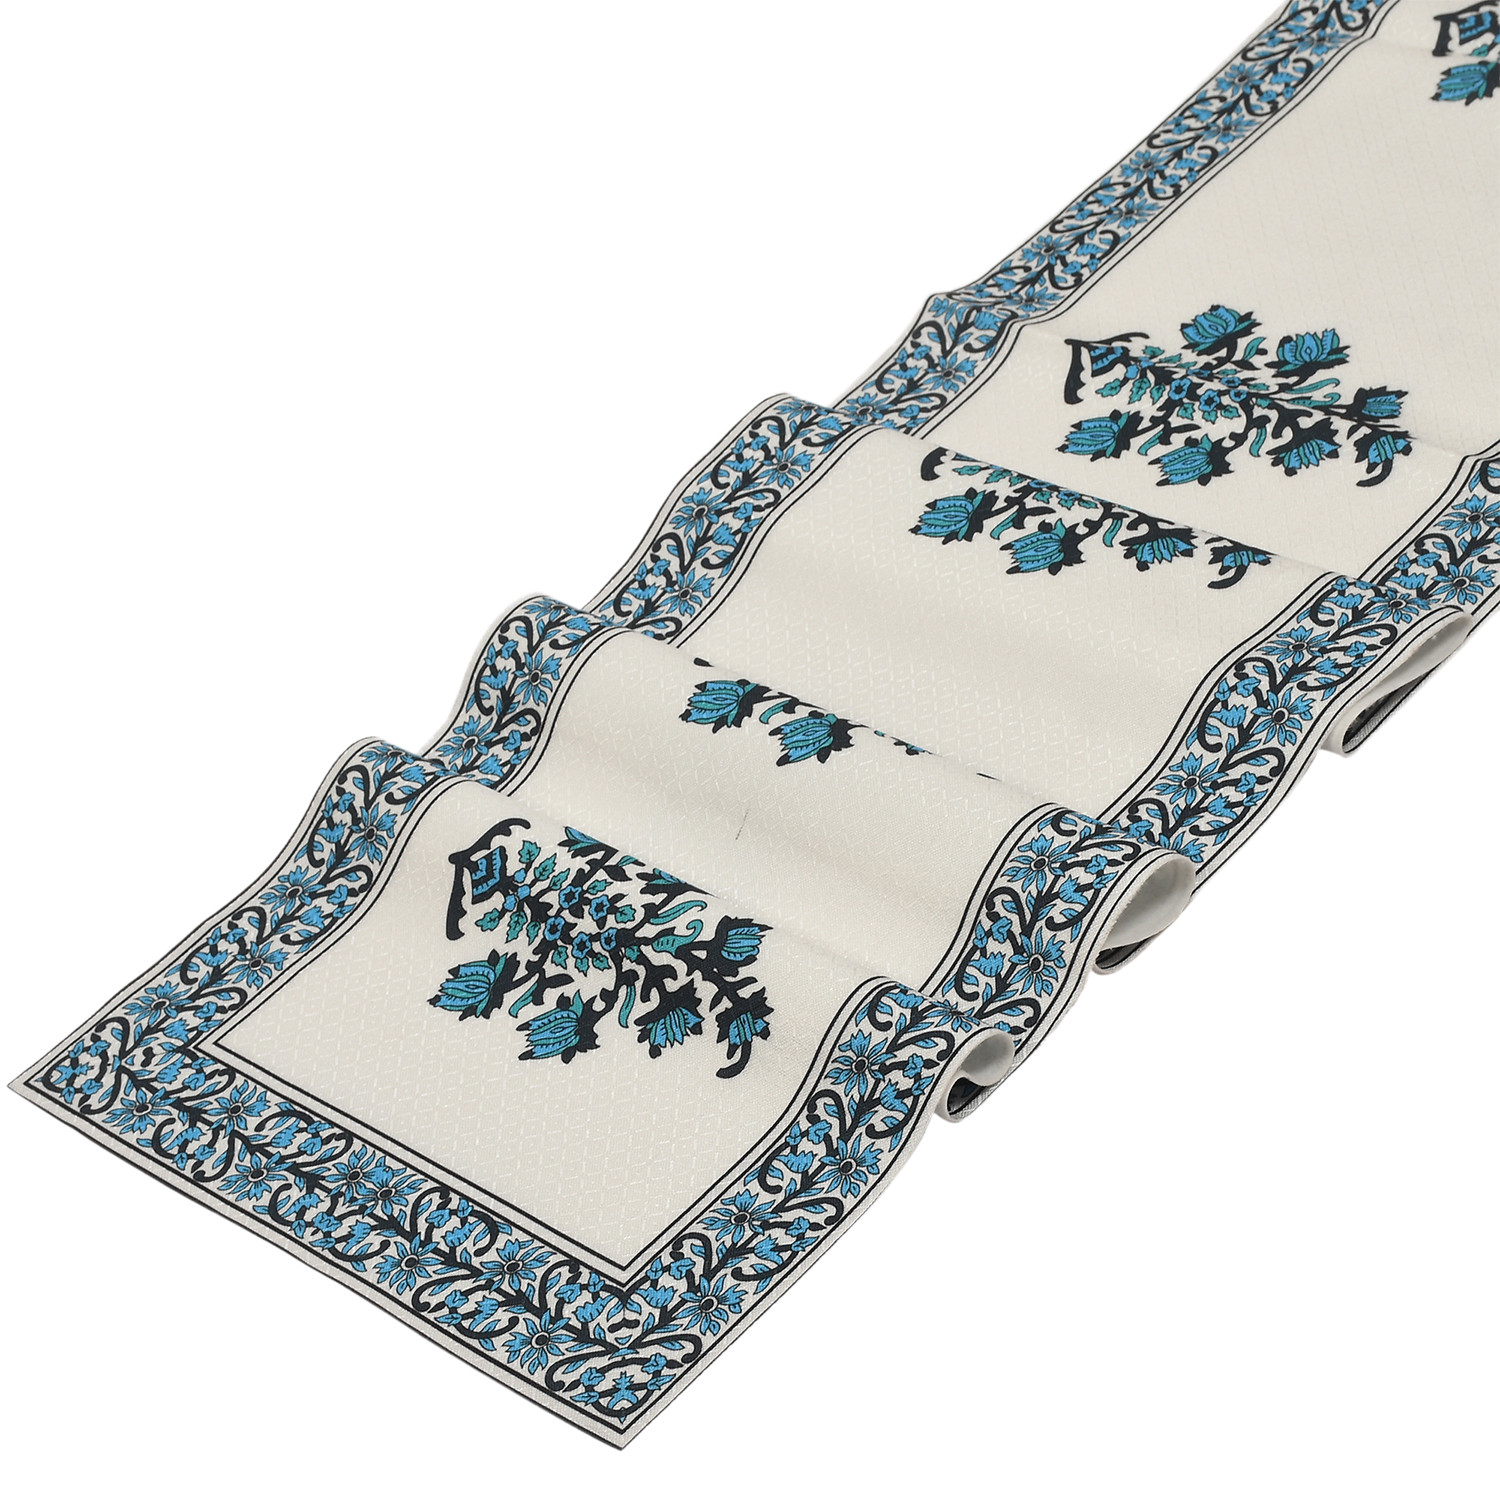 Kuber Industries Rich Fabric Table Runner & Placemats For Living, Dinning, Office, Kitchen & Wedding Set of 7 (Blue) 54KM4147